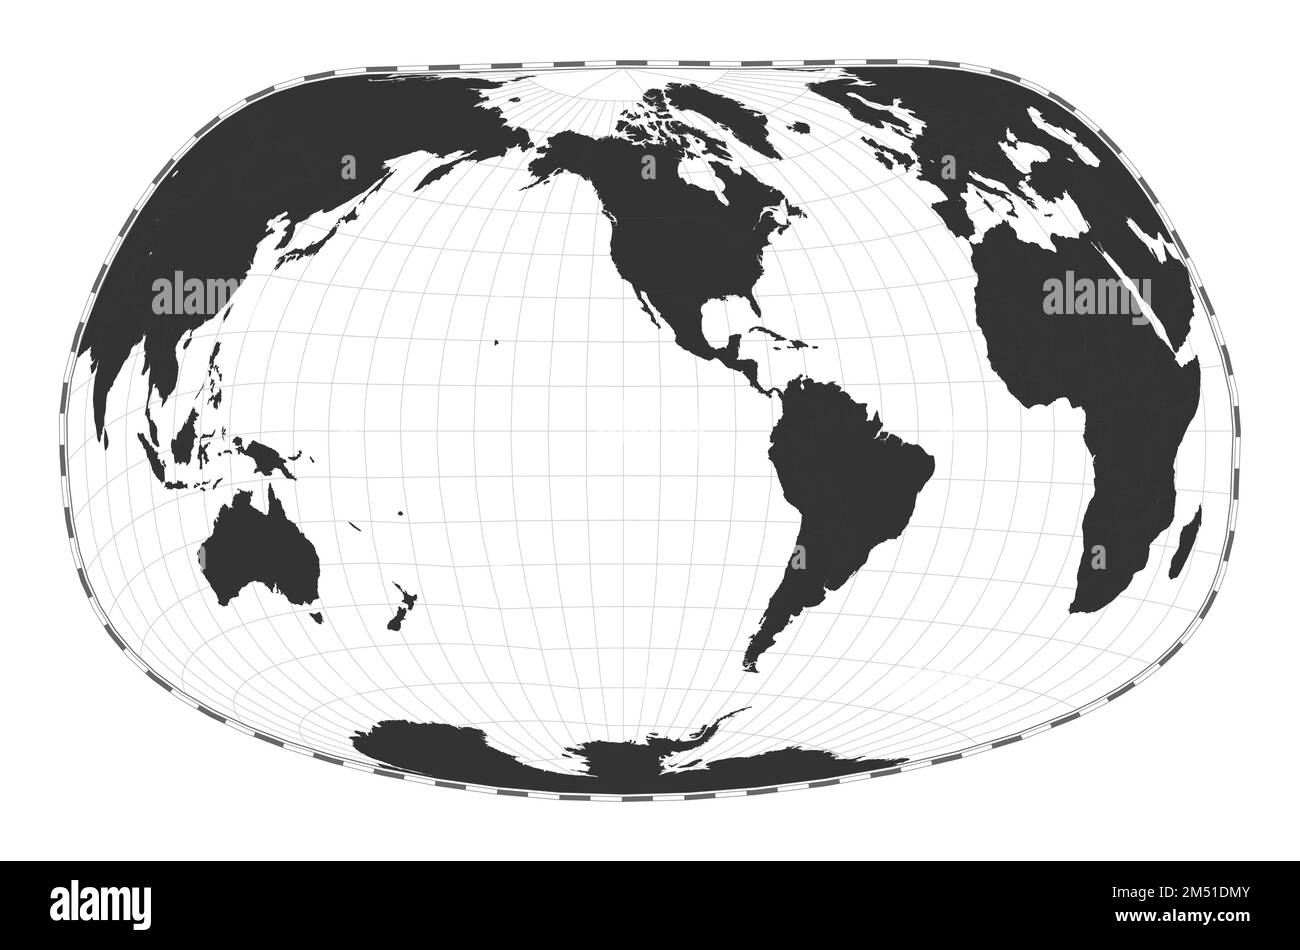 World Map Vector Jacques Bertins 1953 Projection Stock Illustration -  Download Image Now - iStock